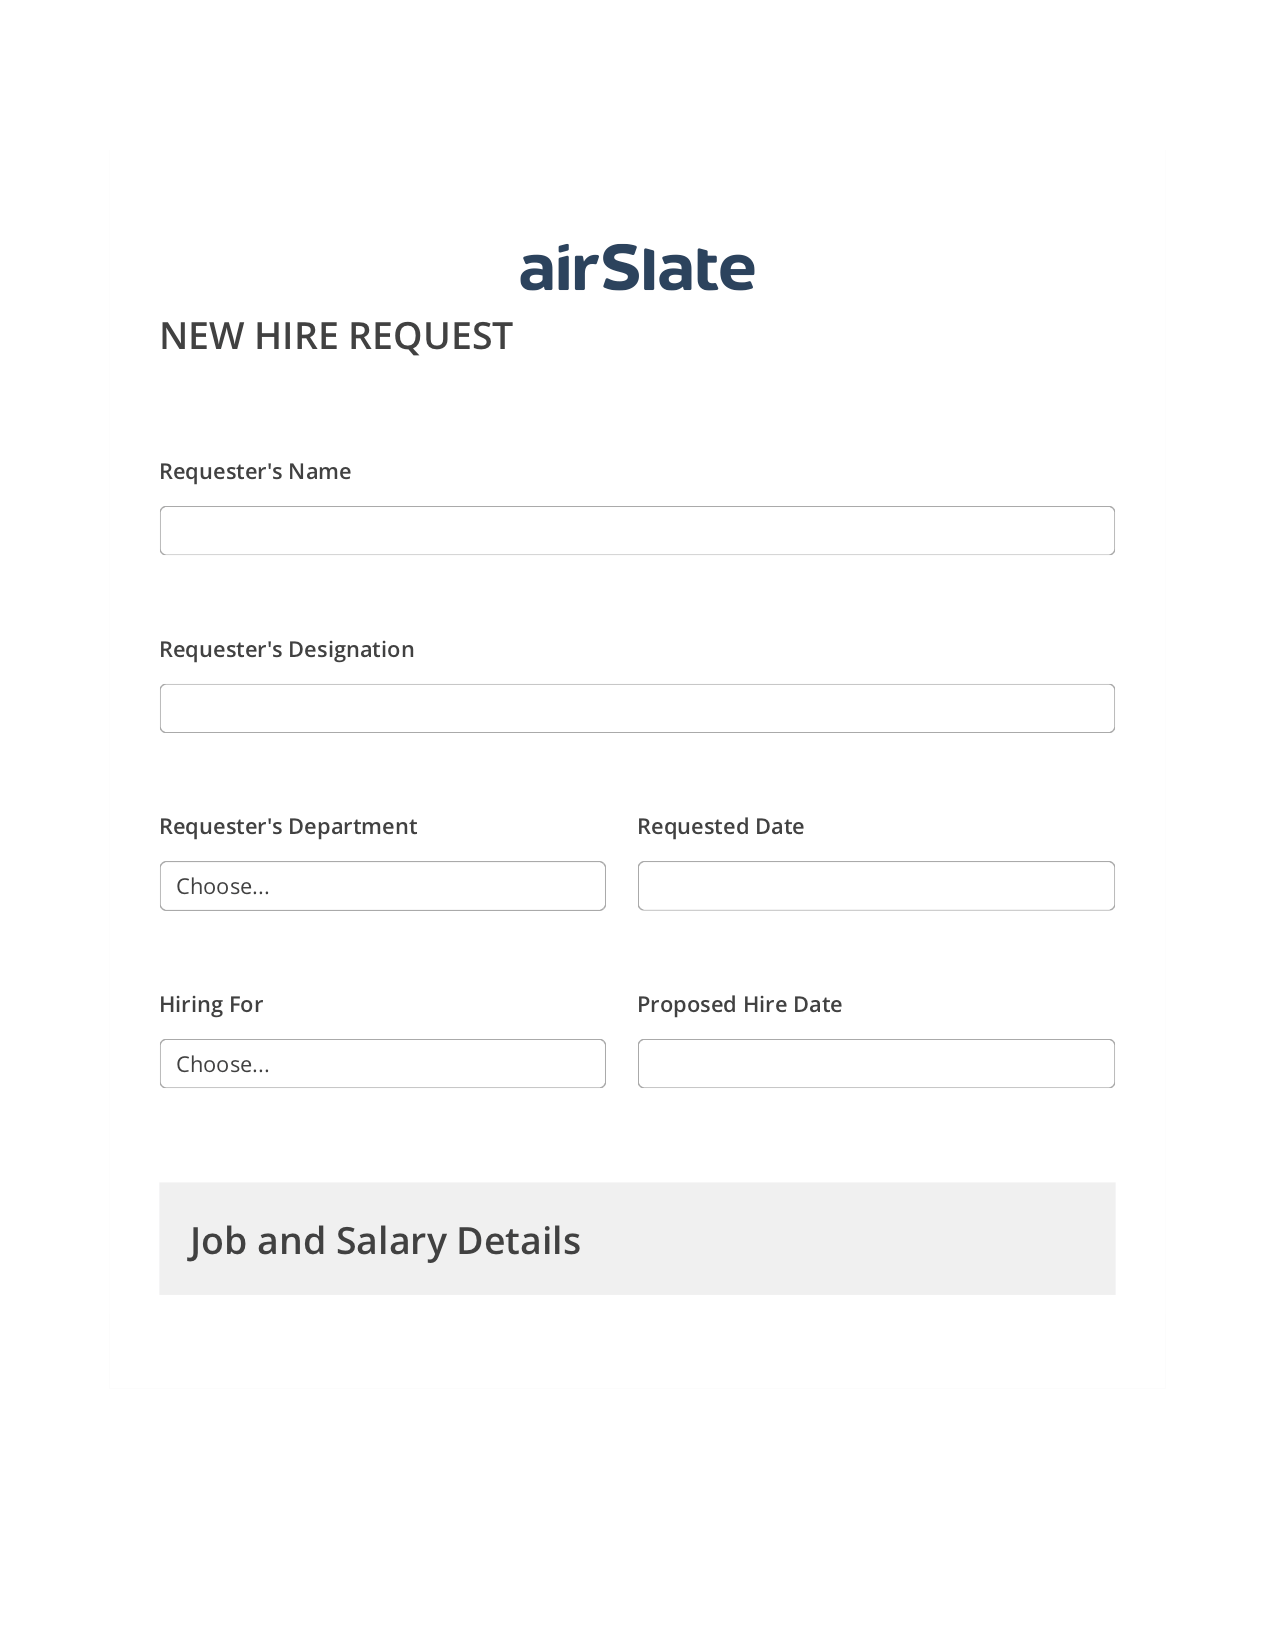 Hiring Request Workflow Pre-fill from Excel Spreadsheet Bot, Add Tags to Slate Bot, Archive to Box Bot